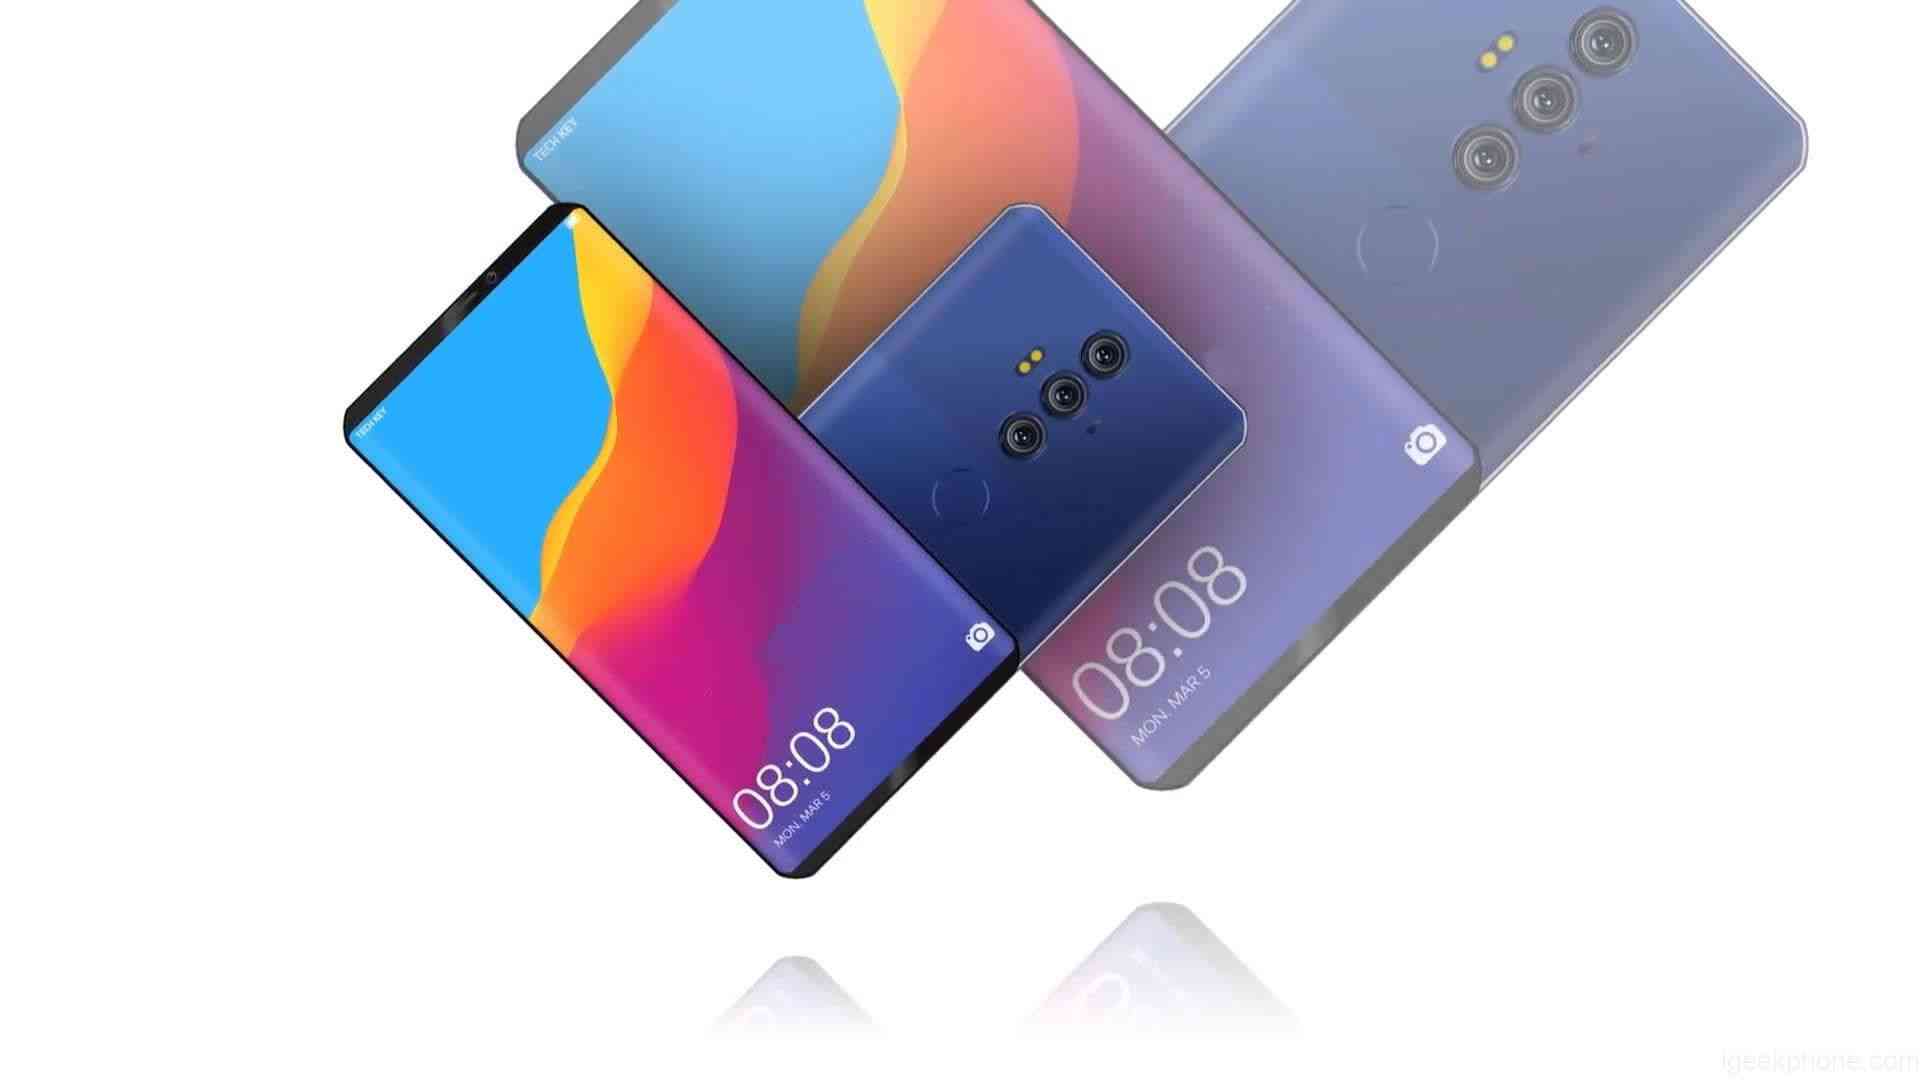 huawei mate 20 sold 100 million in 8 seconds 476 big 1